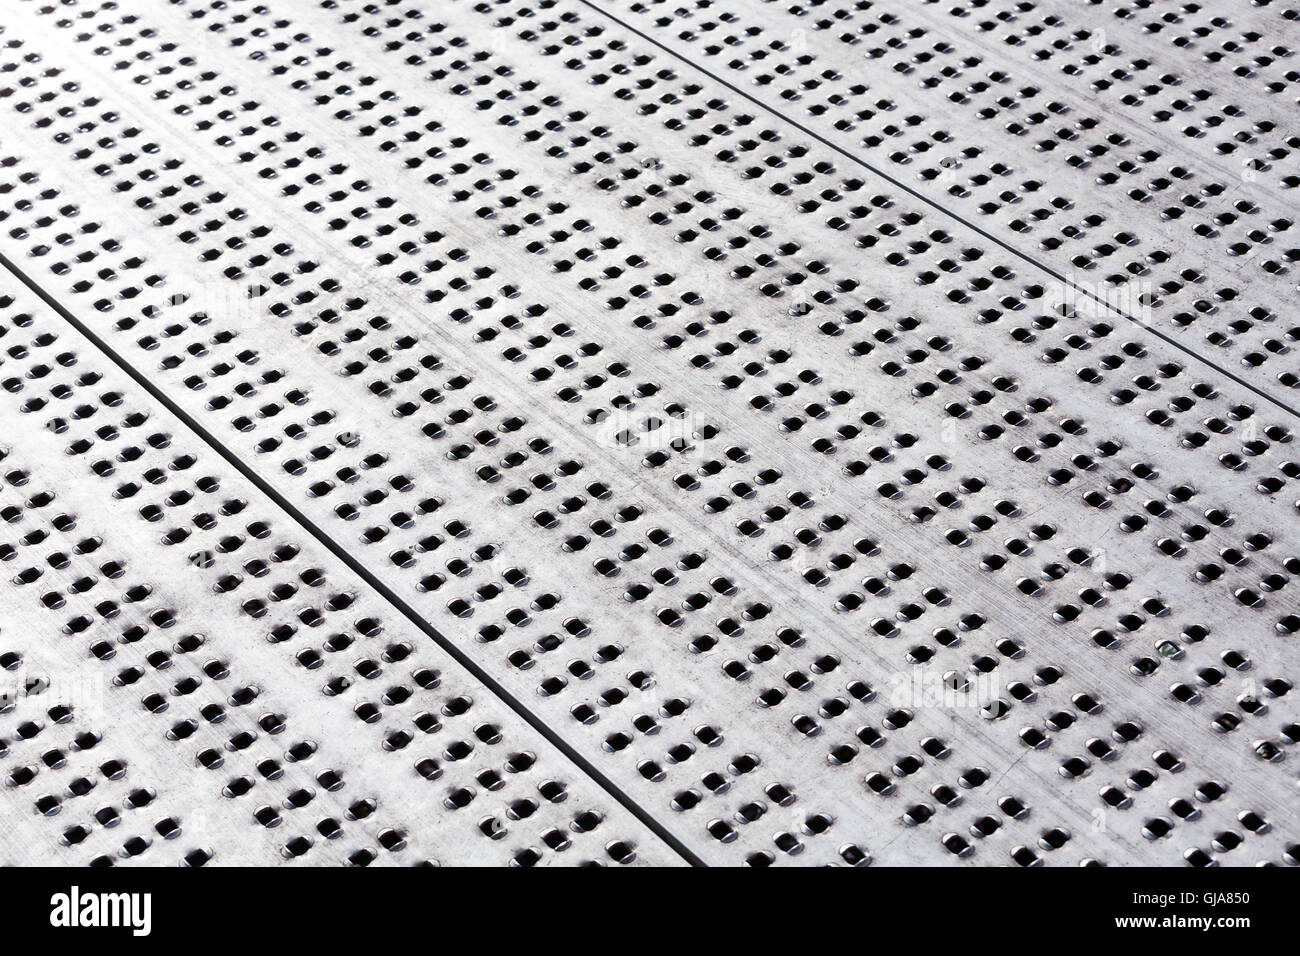 Scratched industrial metal floor surface with holes Stock Photo